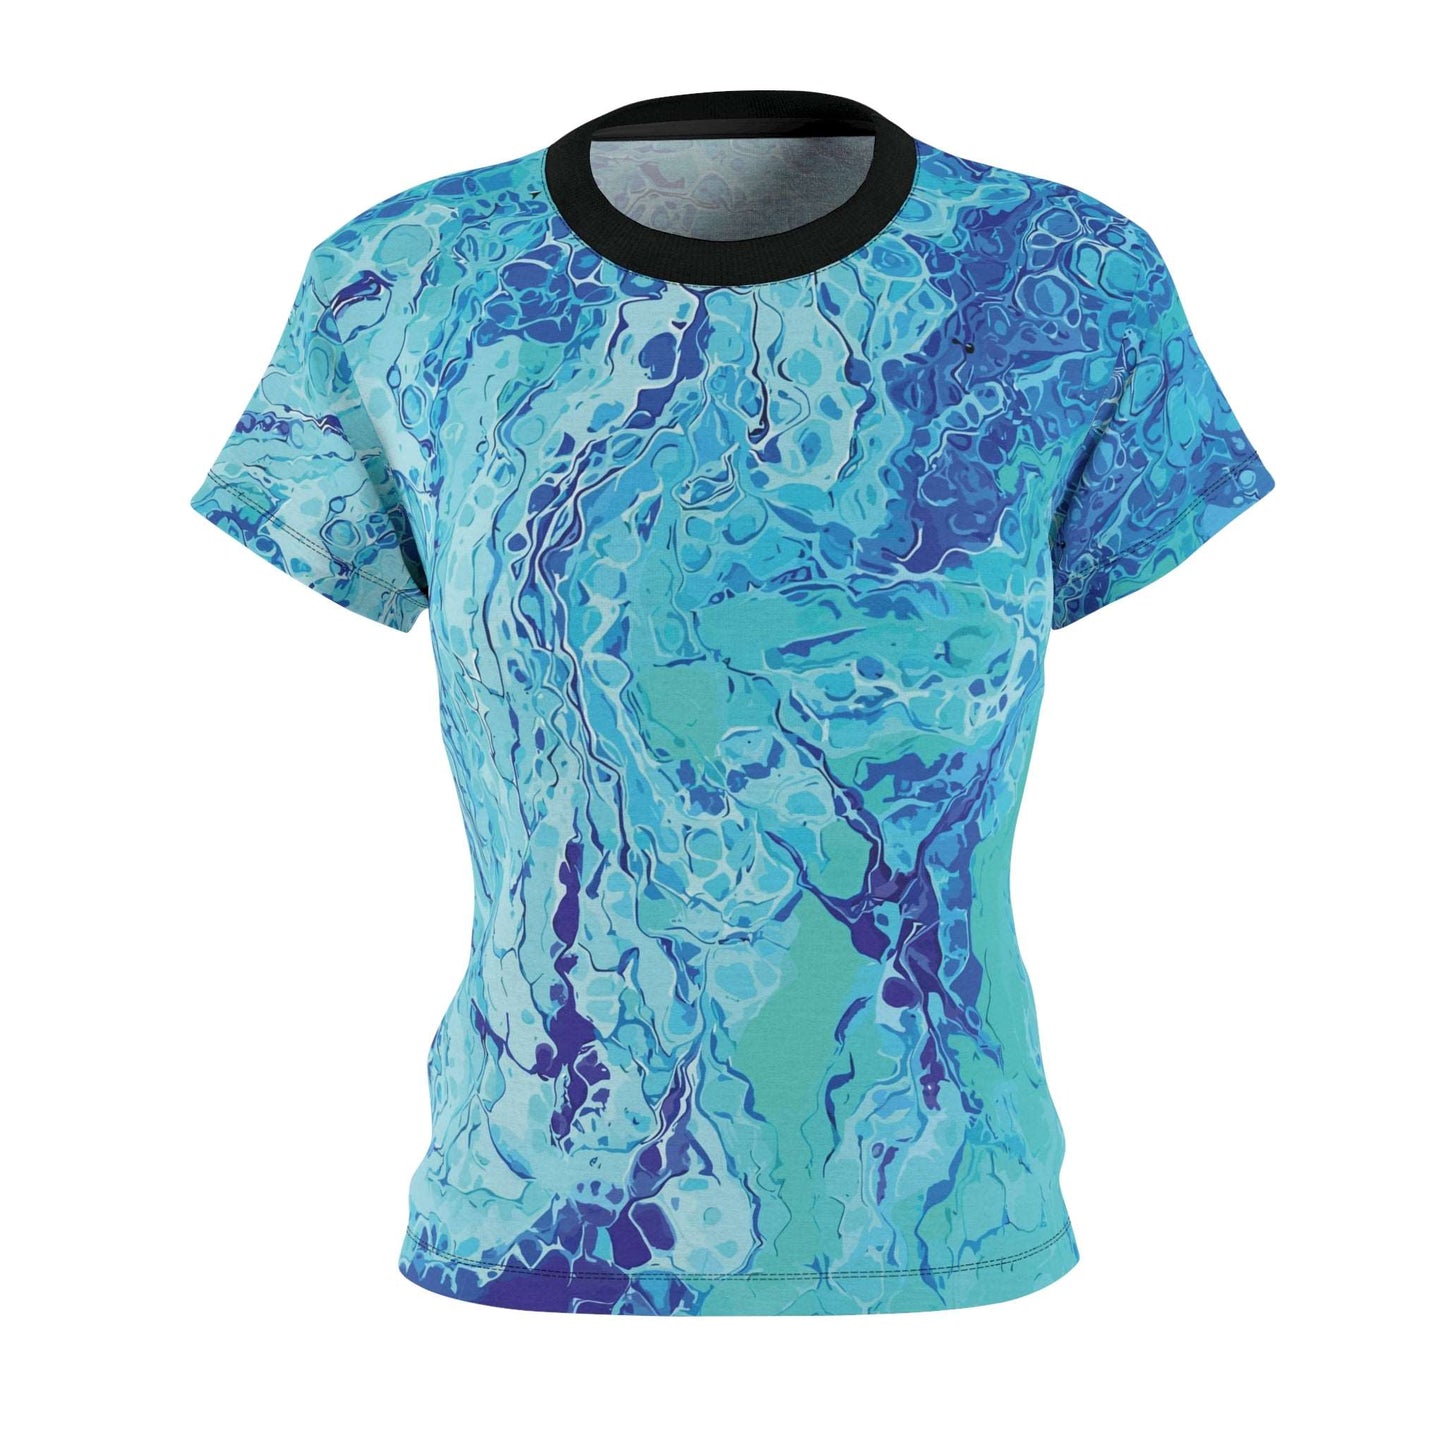 Bubble Whammy: Women's All-Over Print Cut & Sew Tee